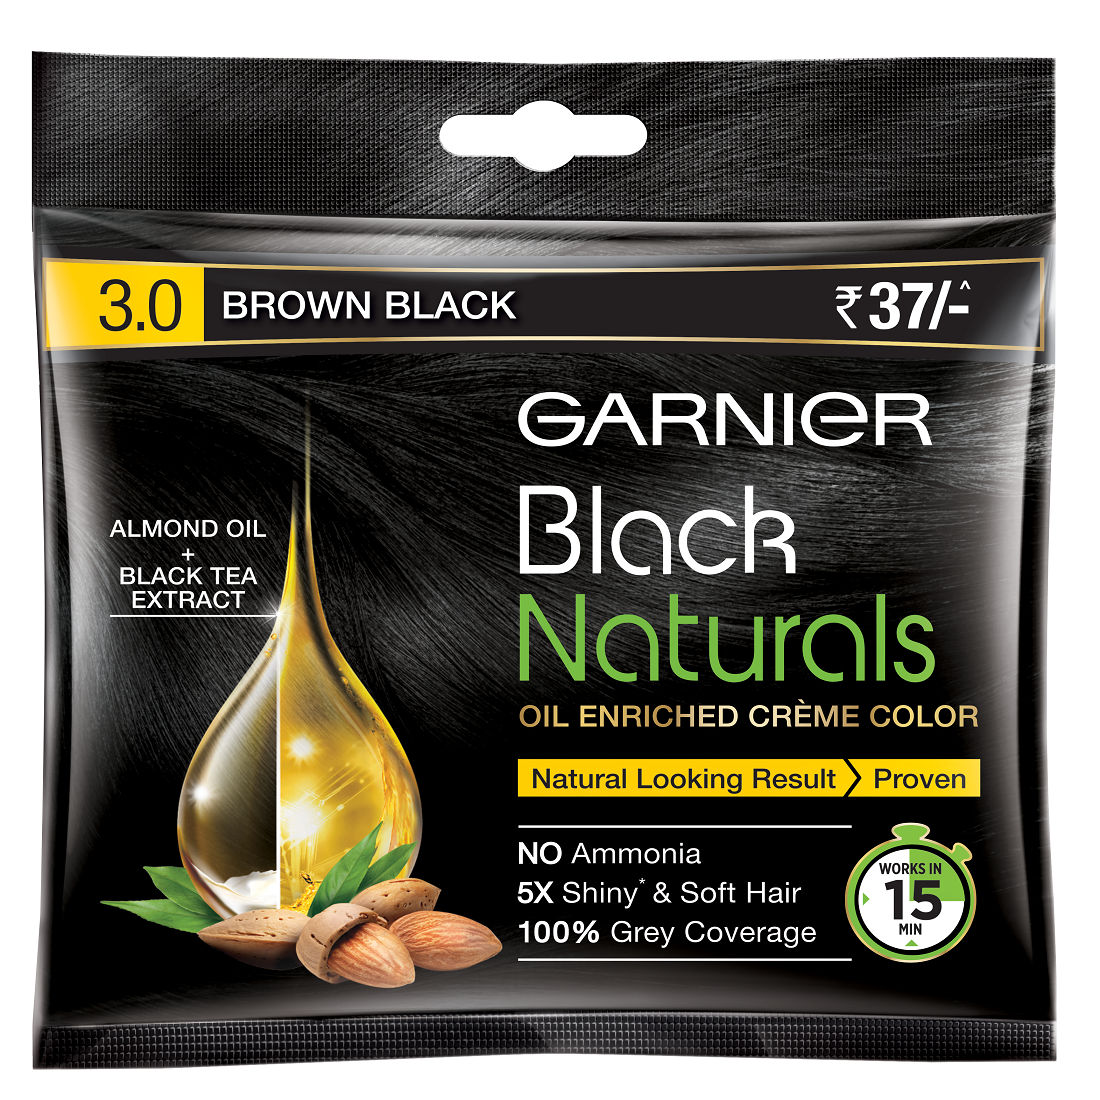 Garnier Black Naturals Oil Enriched Cream Hair Colour: Buy Garnier Black  Naturals Oil Enriched Cream Hair Colour Online at Best Price in India |  Nykaa